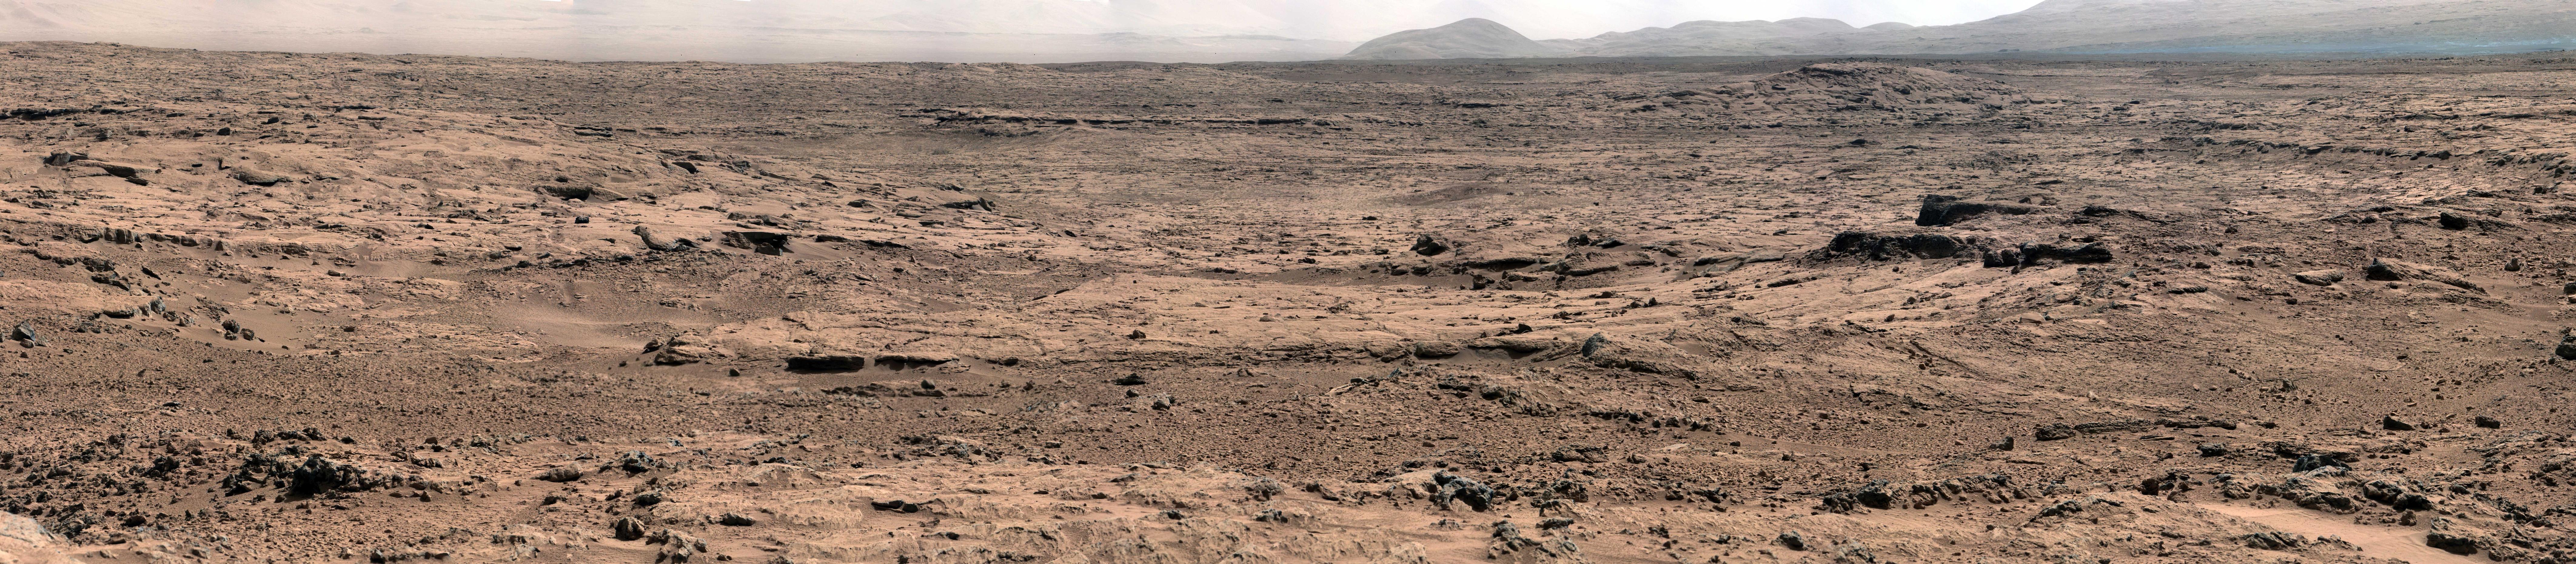 Panoramic View From 'Rocknest' Position of Curiosity Mars Rover